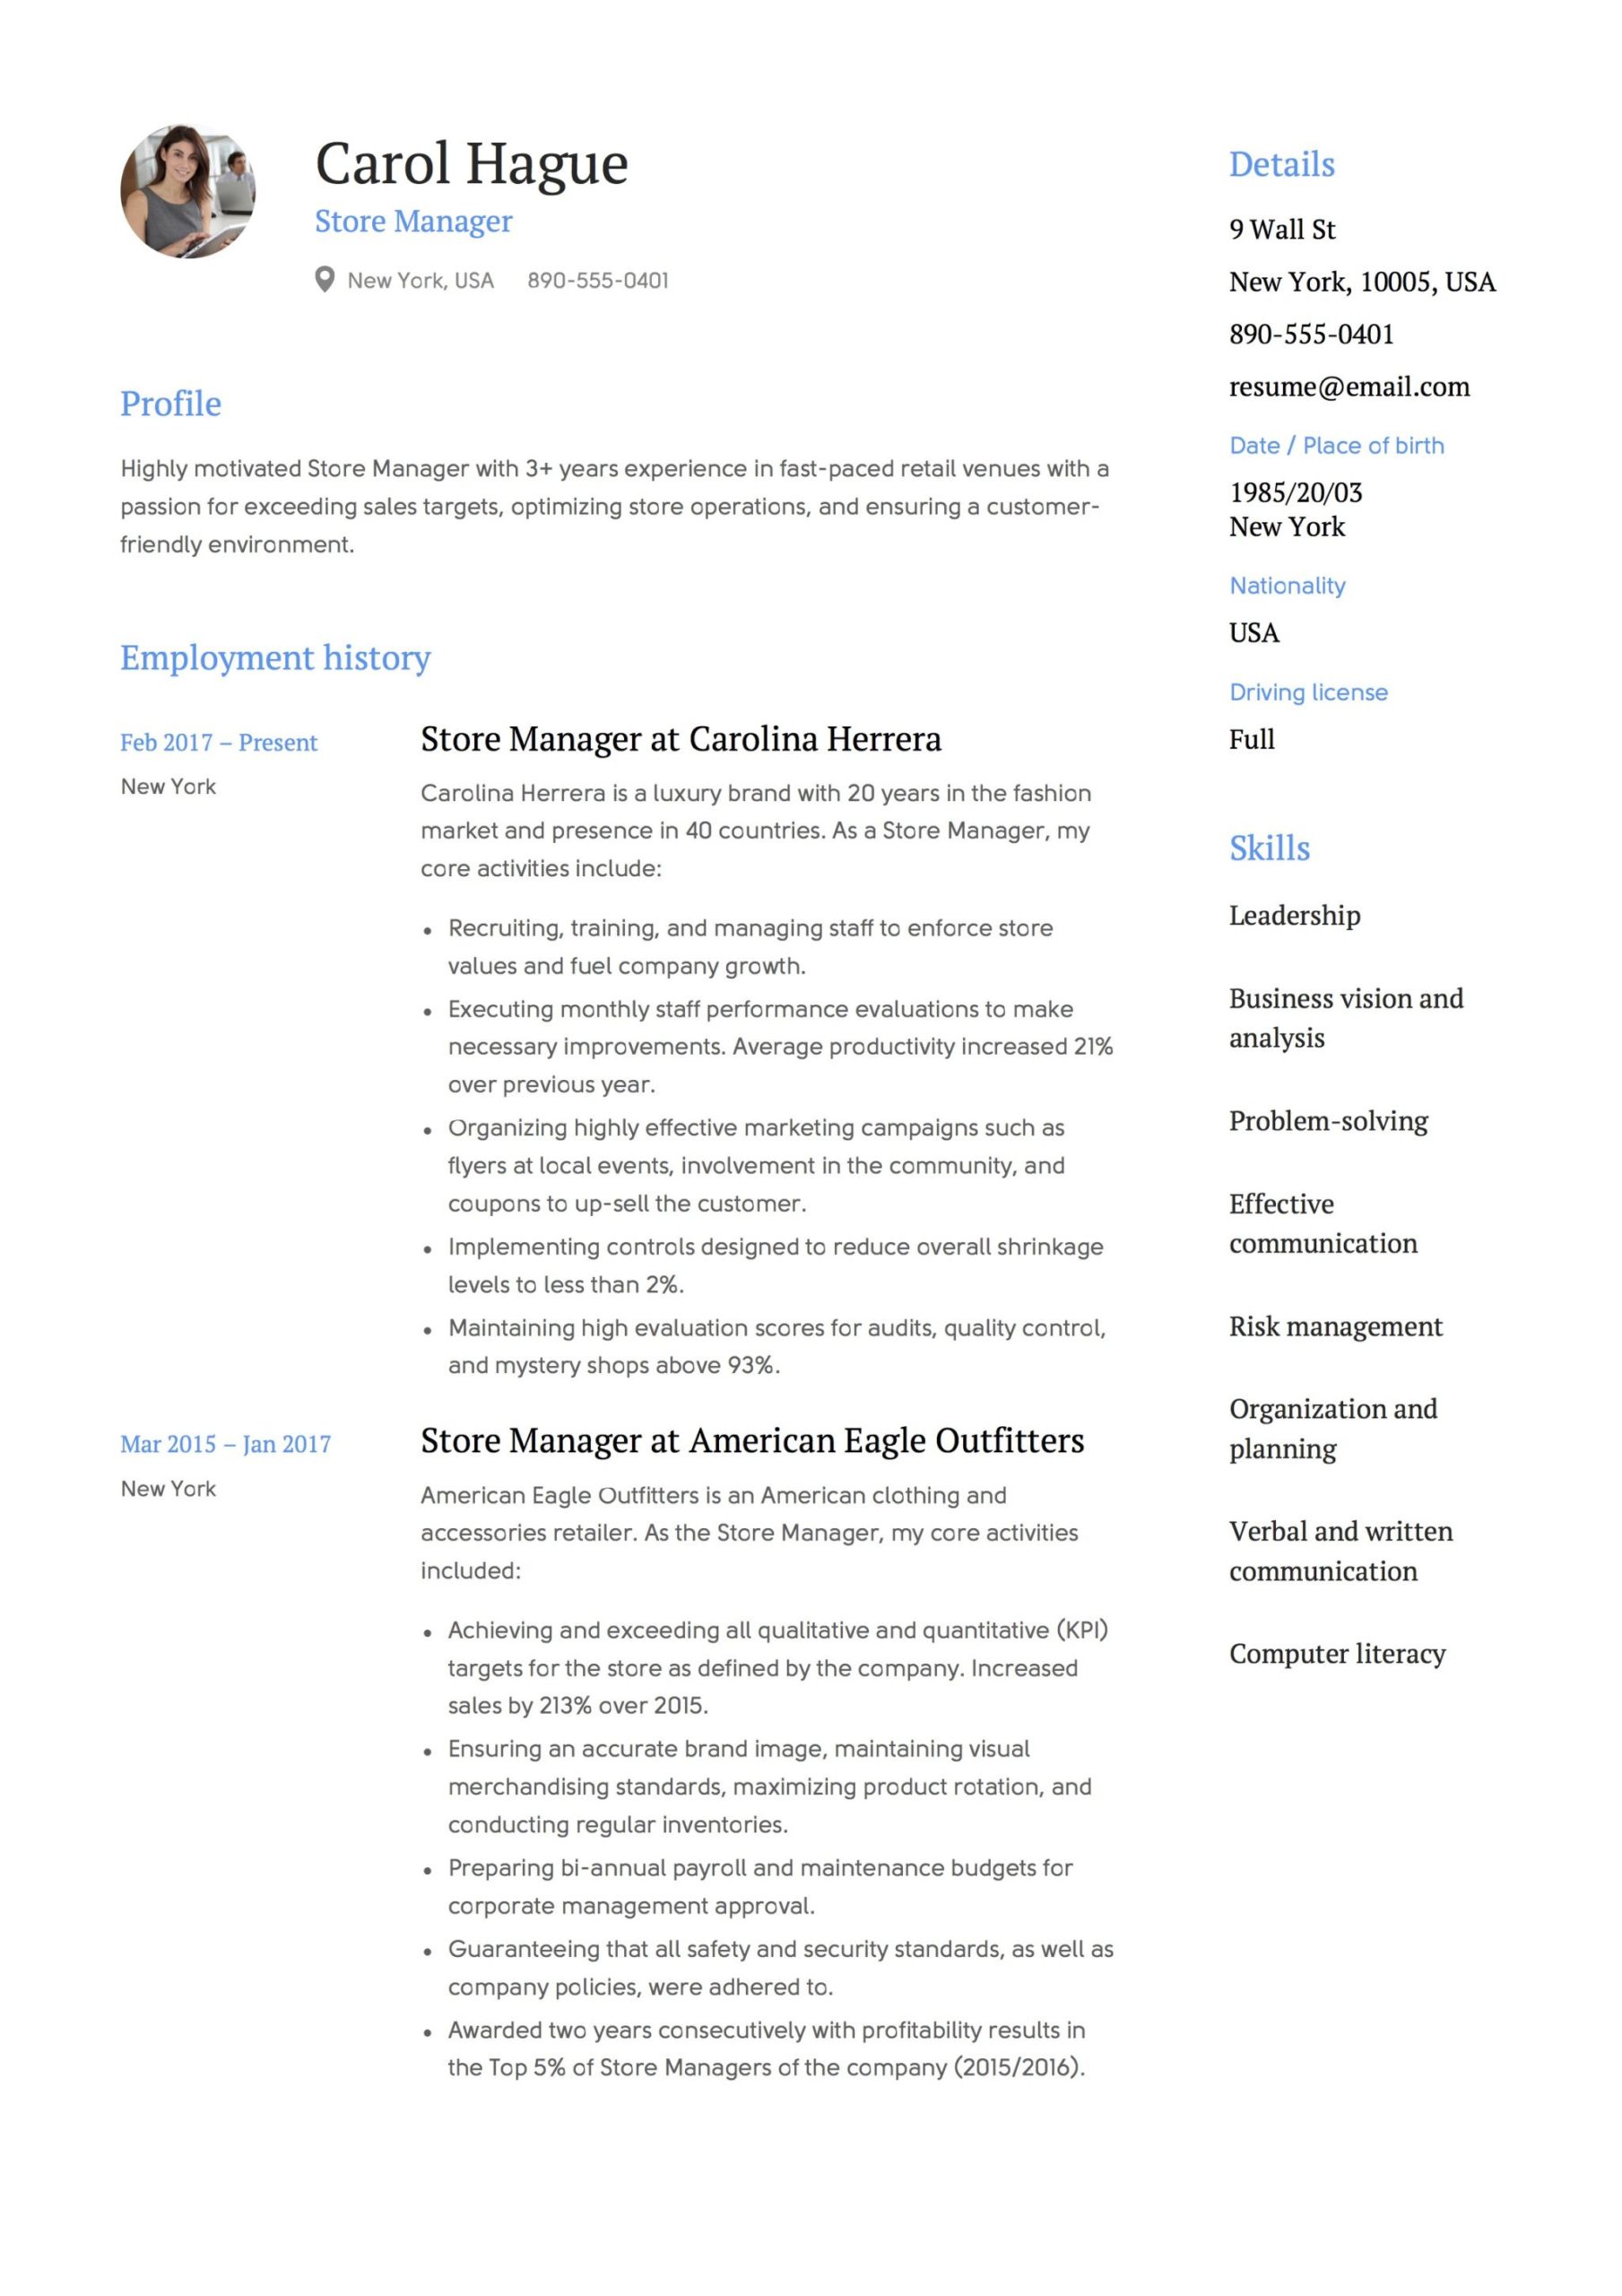 Sample Resume Description Of A Retail Business Owner Retail Resume Examples 2022 Free Downloads Pdfs